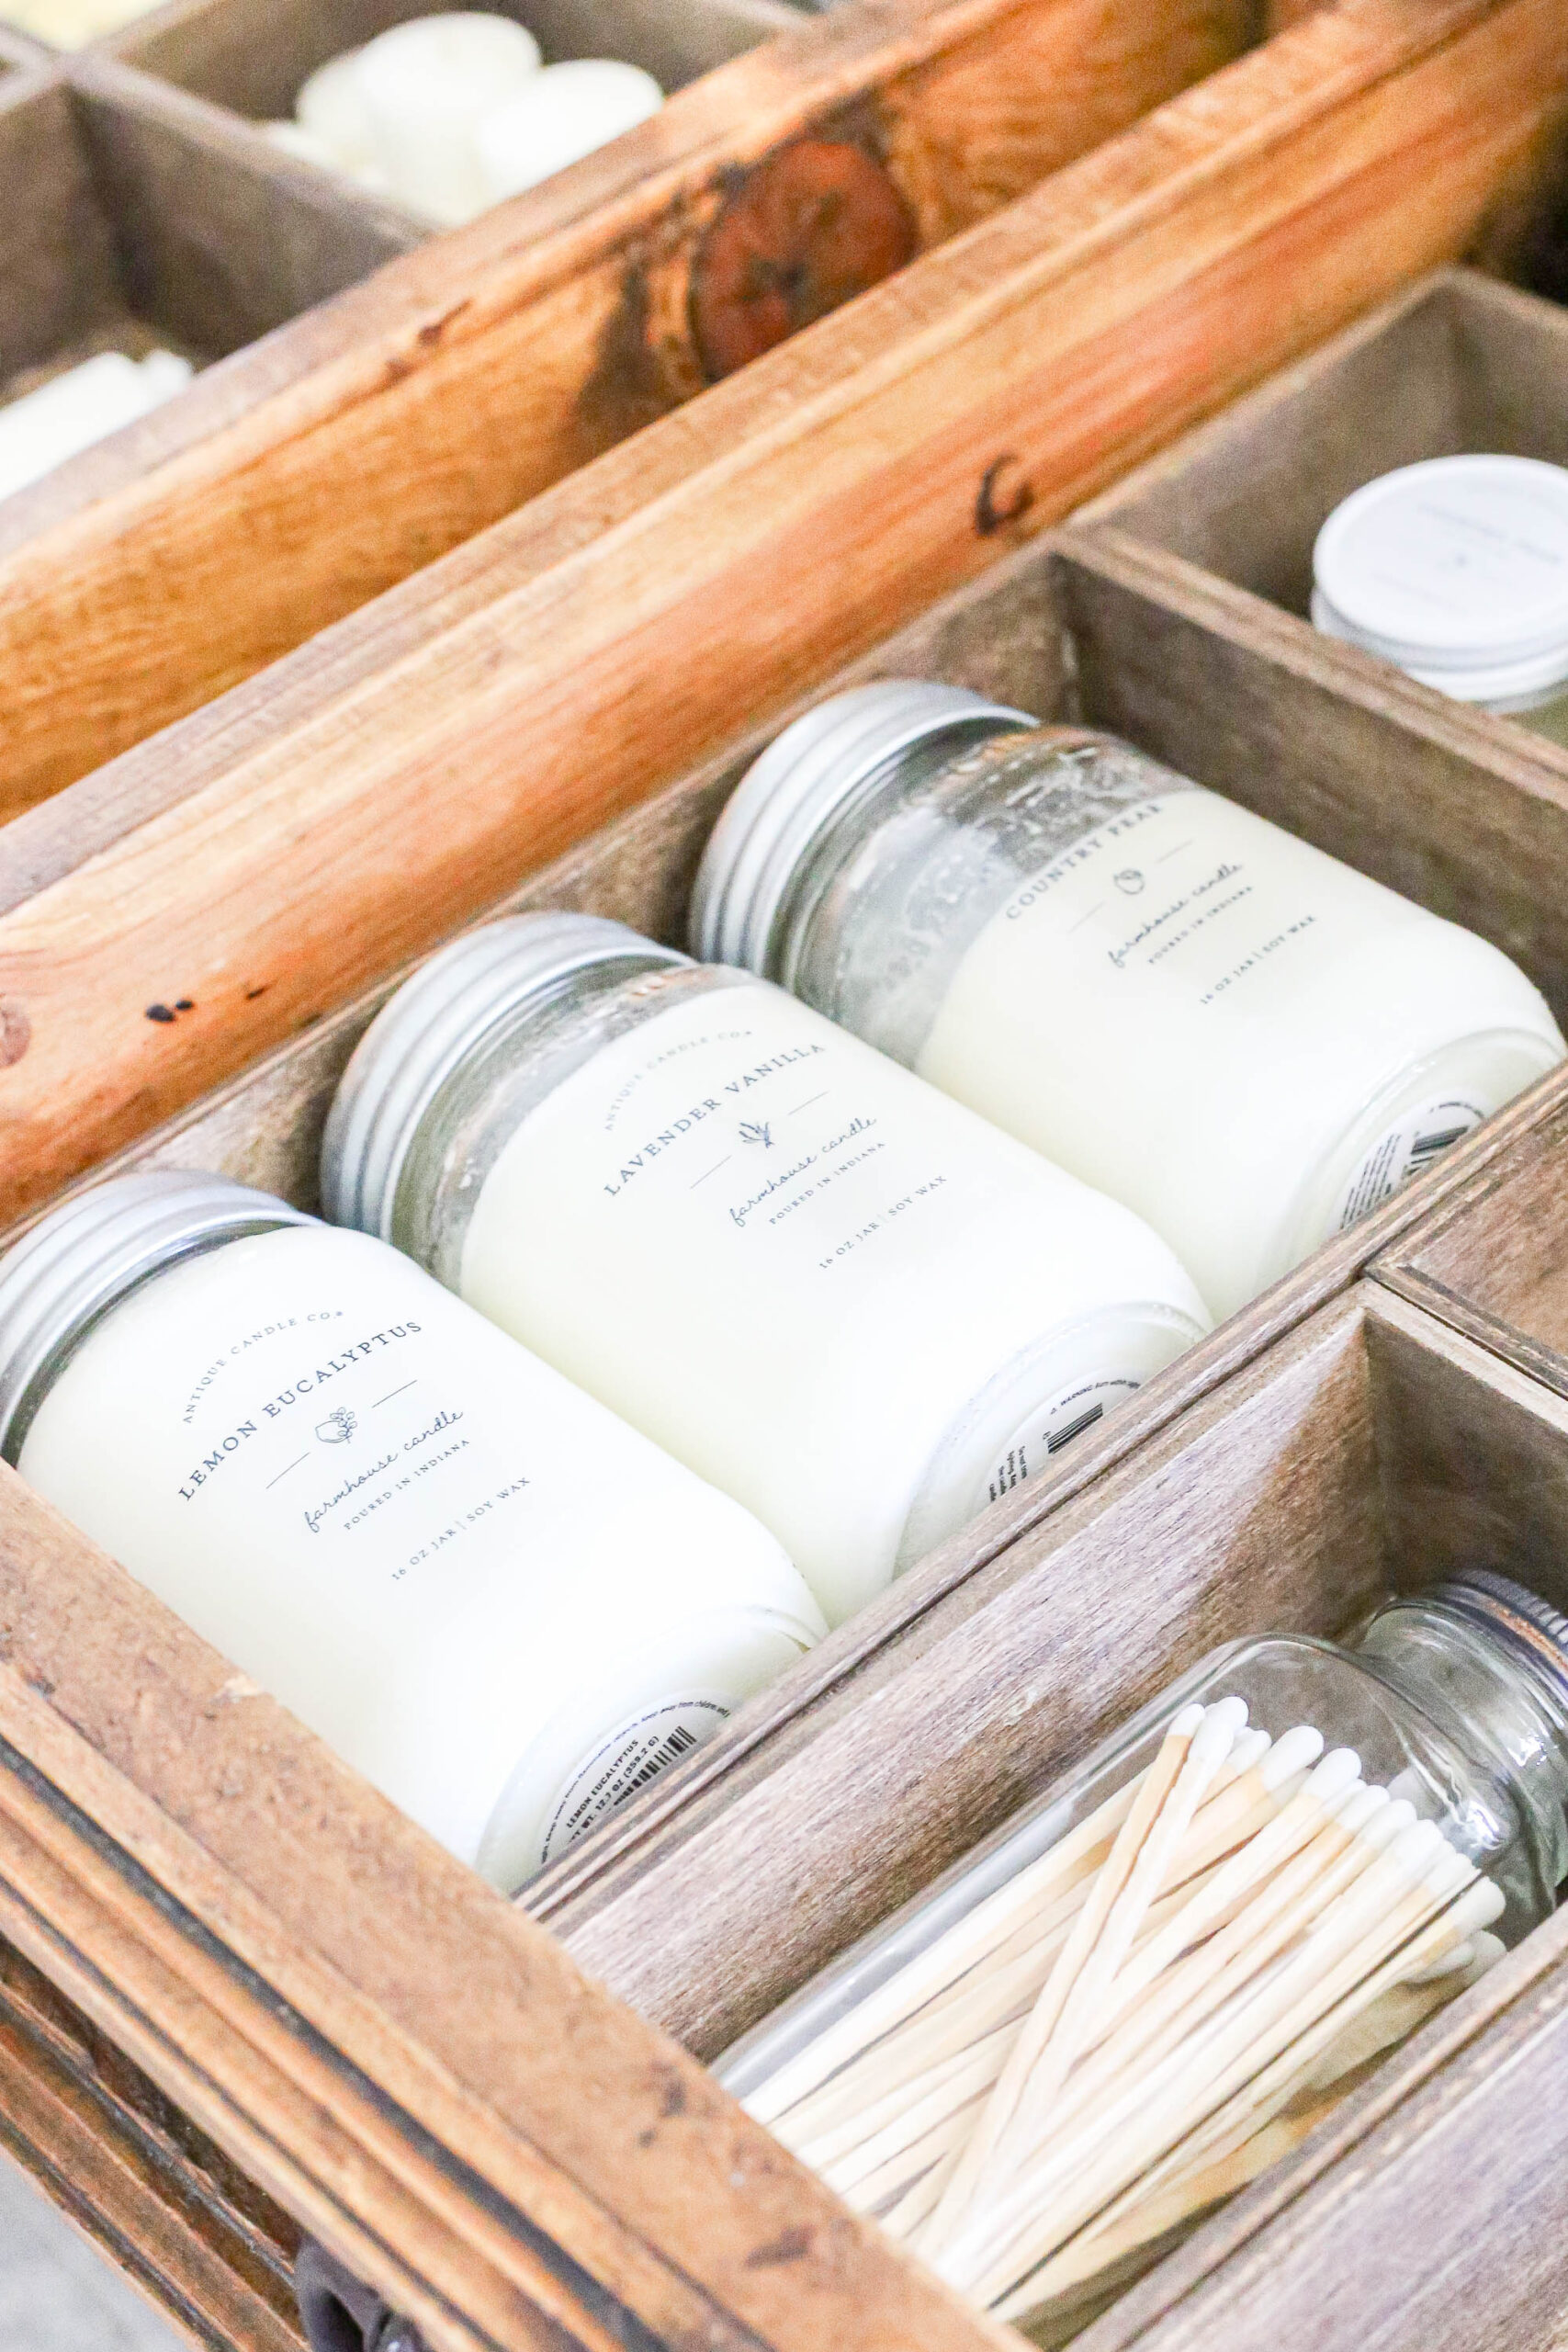 How to Store and Organize Candles